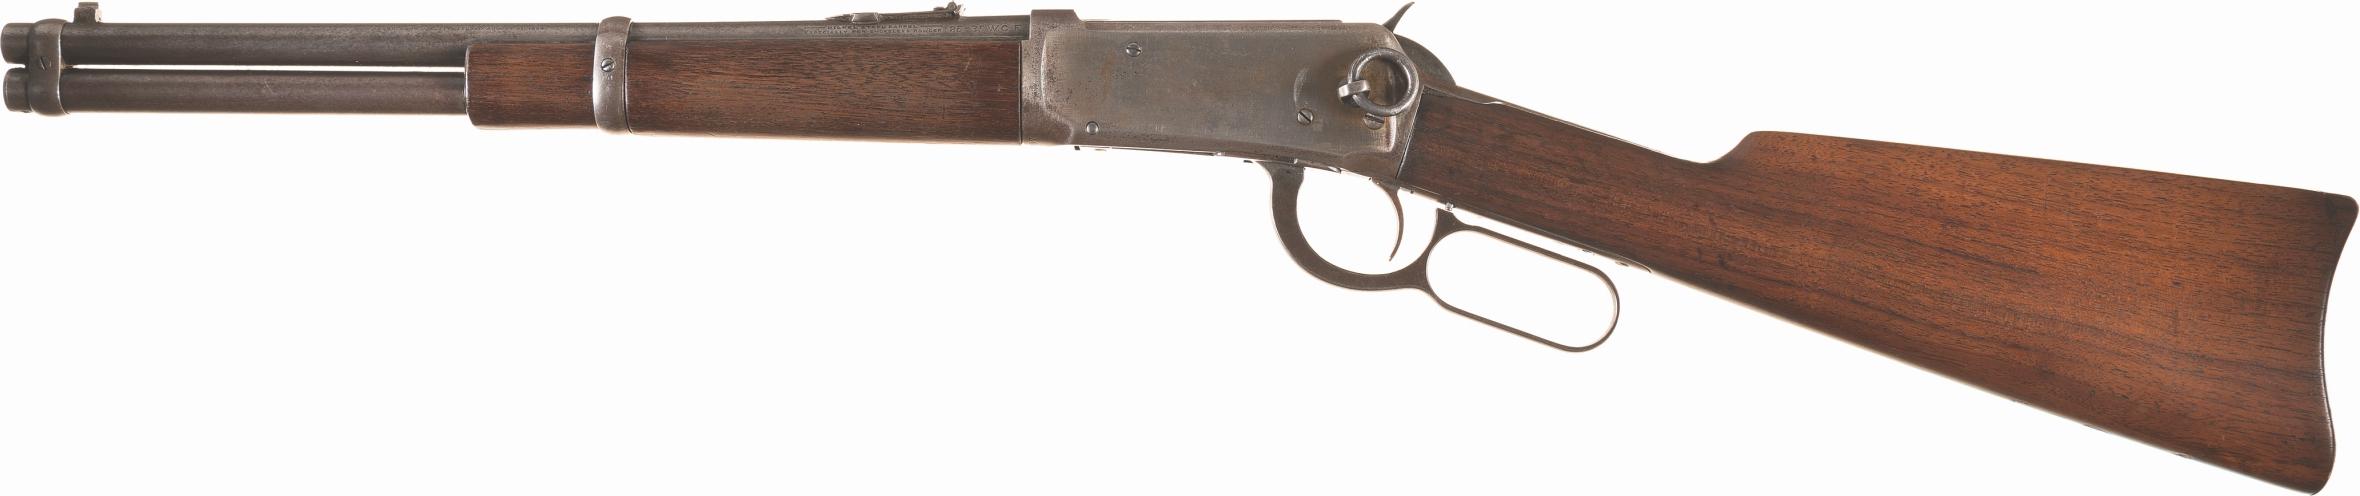 Winchester 1894 Trapper's Carbine with 15" Barrel and ATF Letter